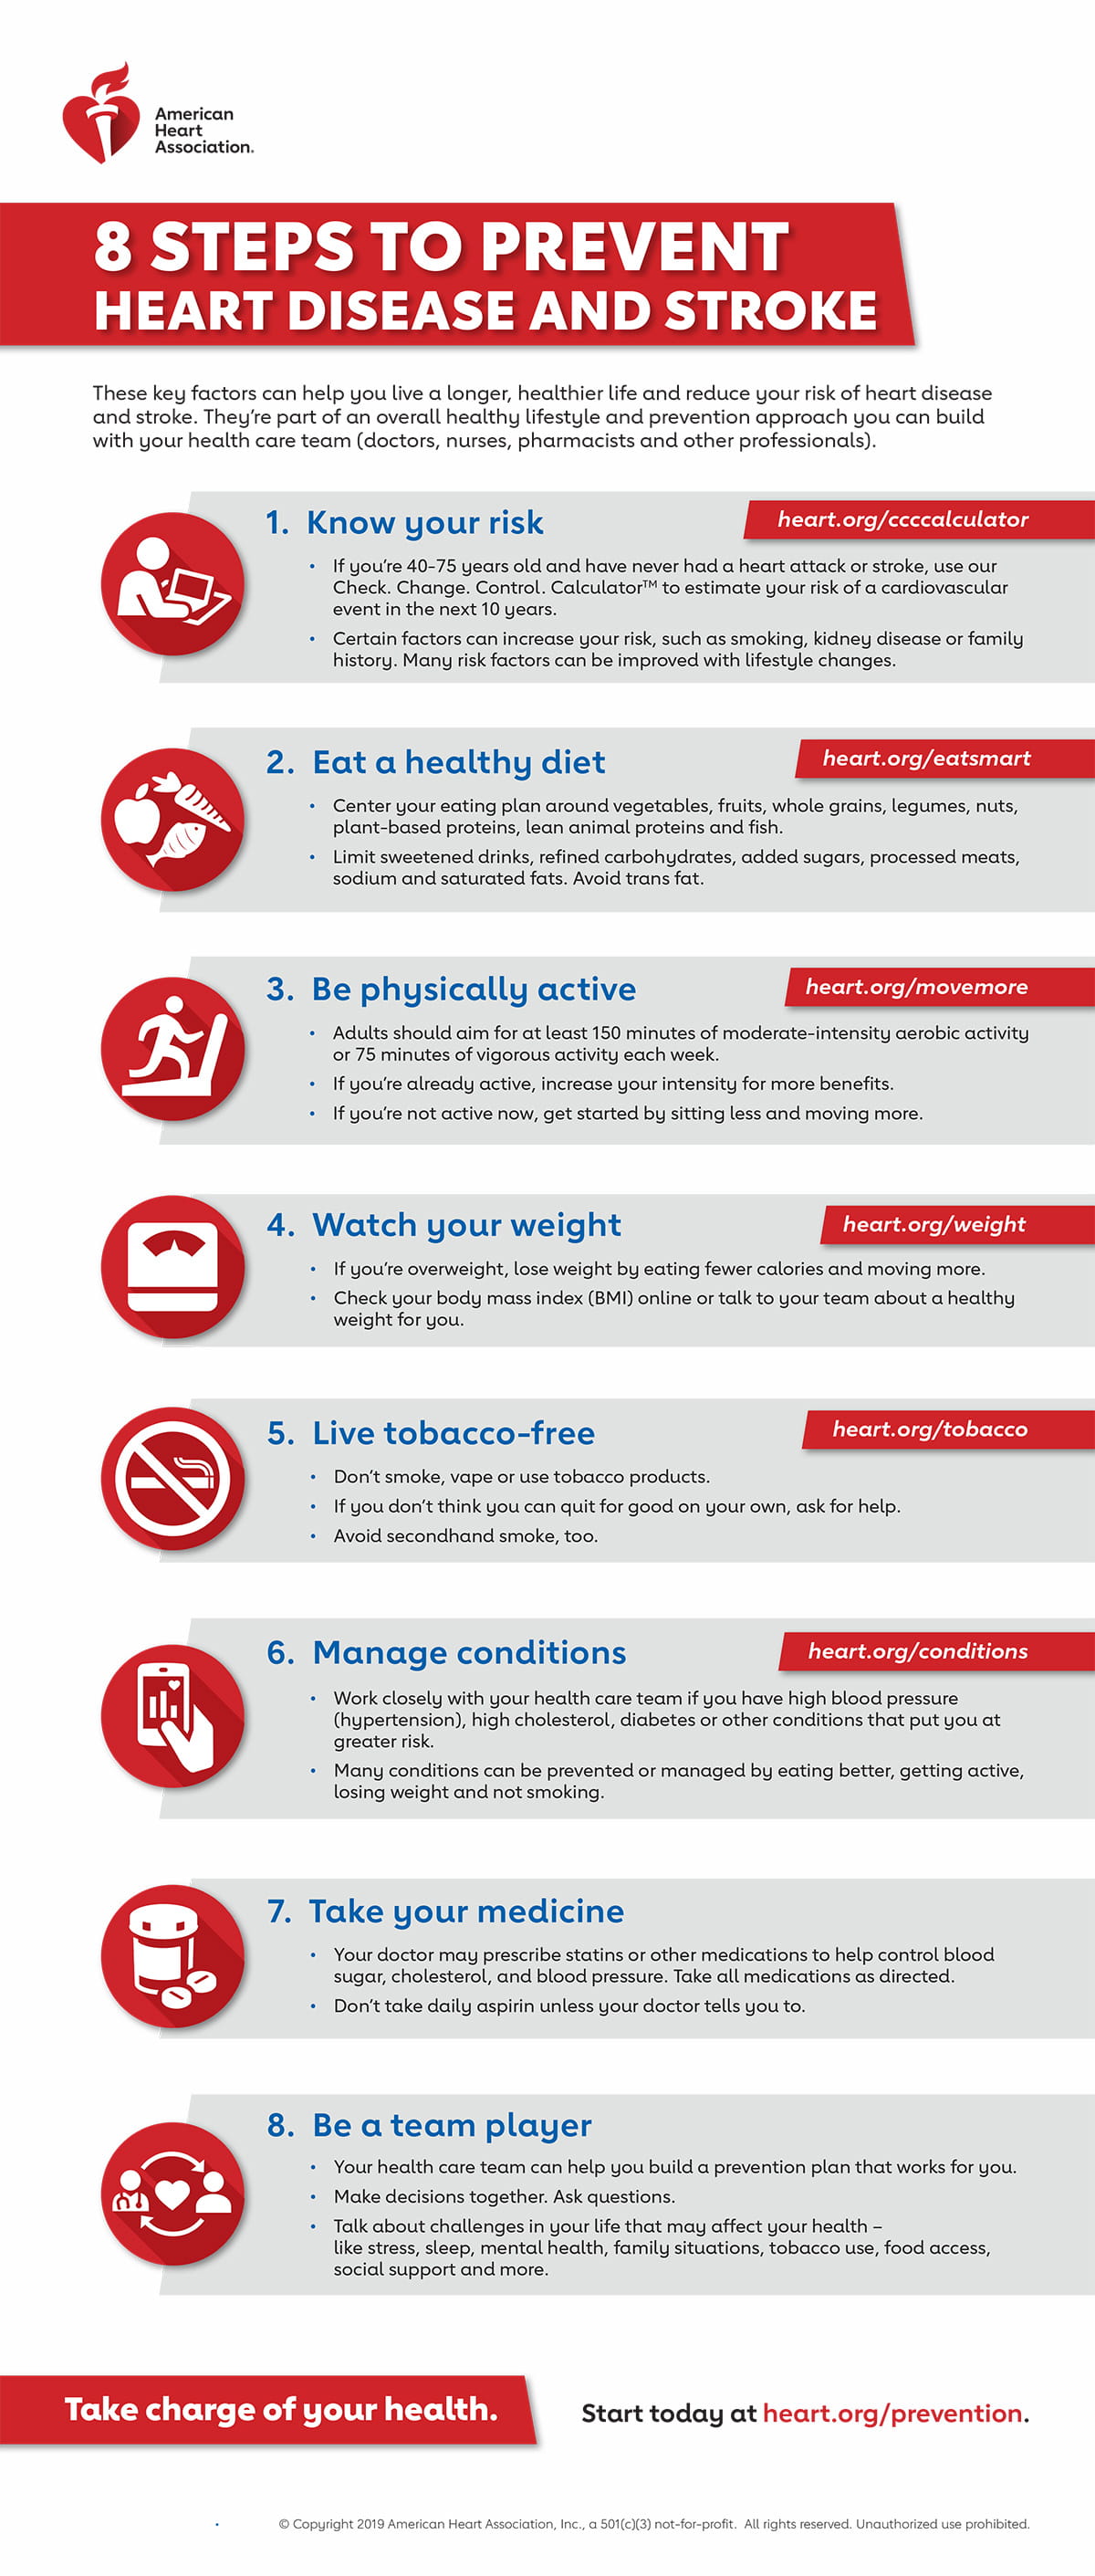 8 Things You Can Do to Prevent Heart Disease and Stroke